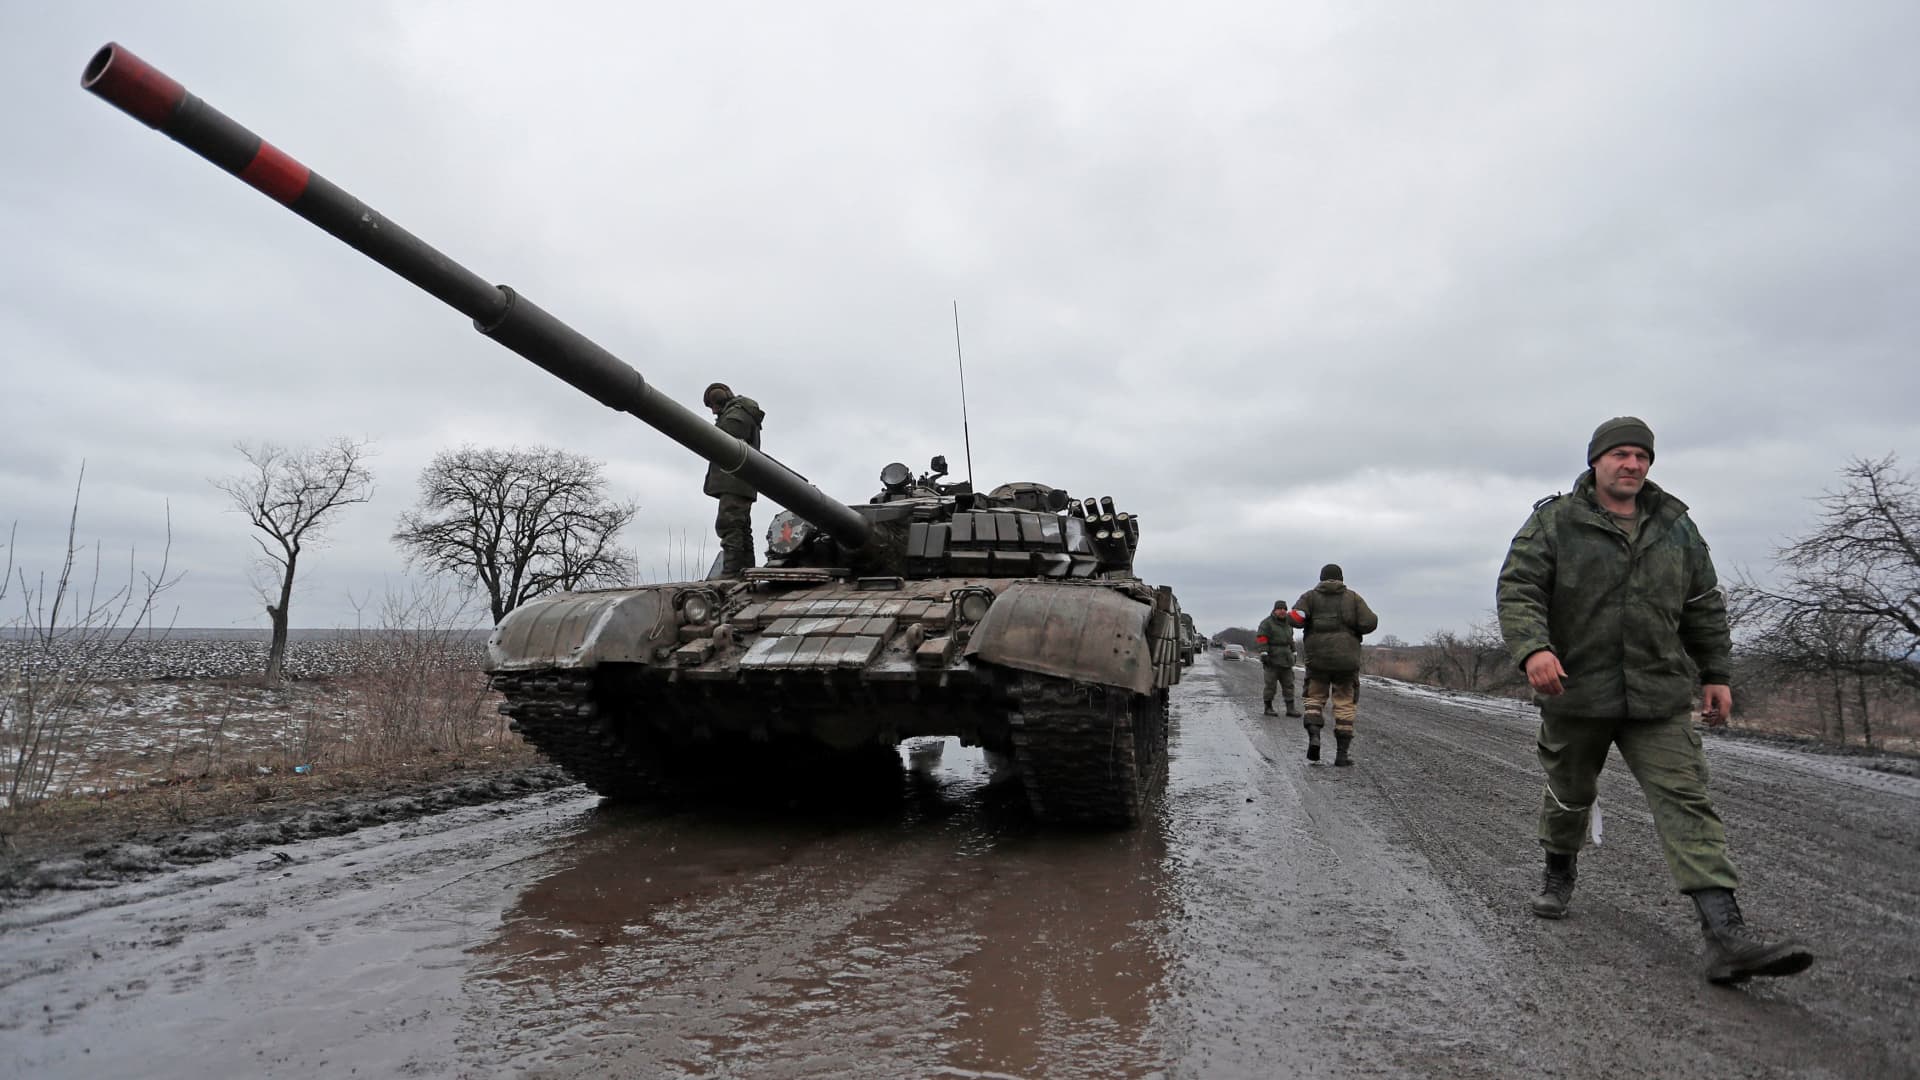 Servicemen of pro-Russian militia walk next to a military convoy of armed forces of the separatist self-proclaimed Luhansk People's Republic (LNR) on a road in the Luhansk region, Ukraine February 27, 2022.